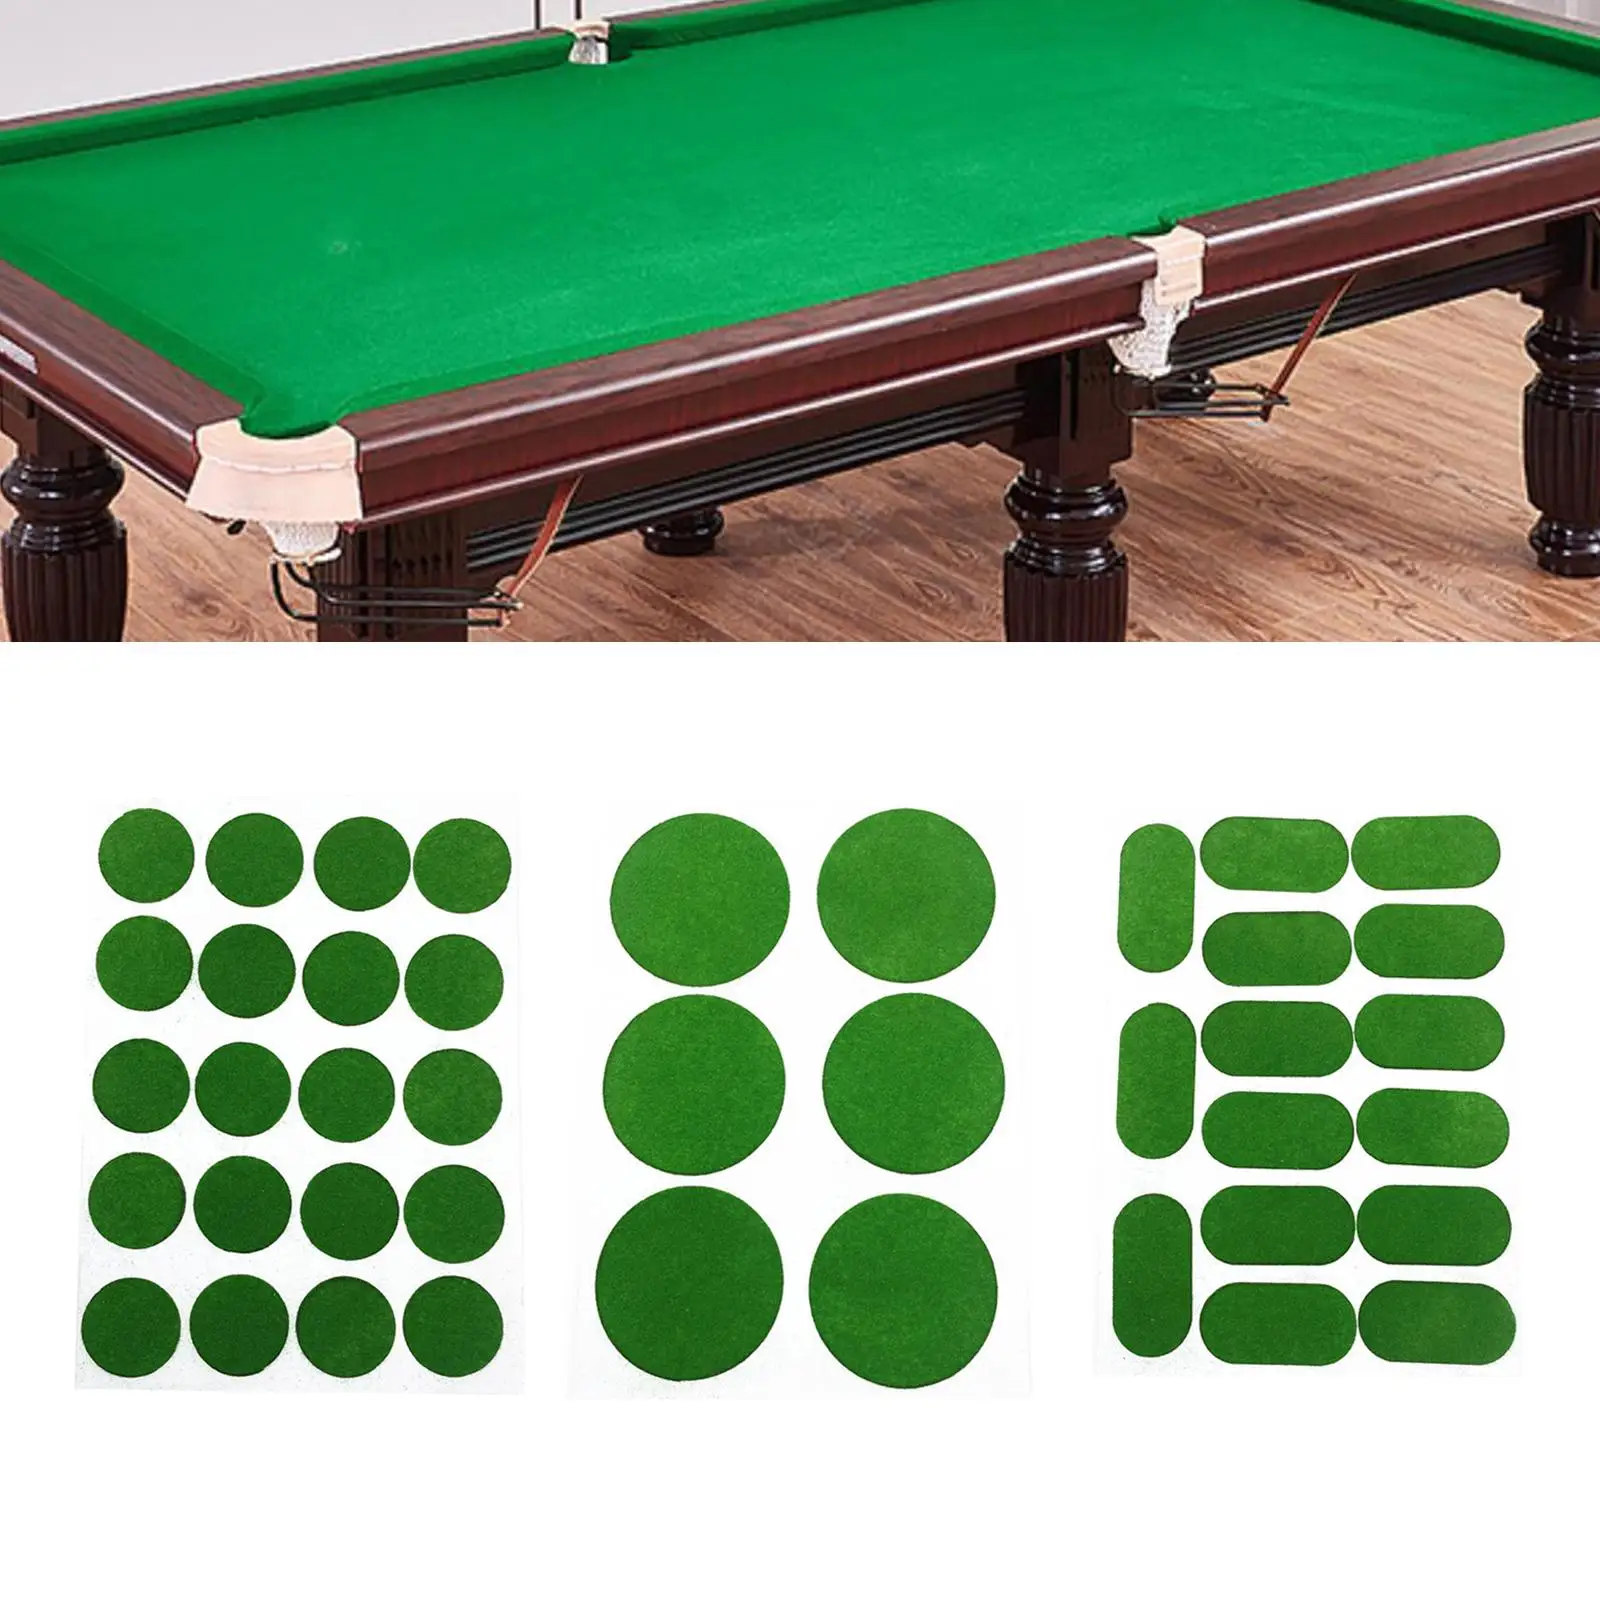 Pool Table Cloth Plasters Stickers Tablecloth Repair Mending Rips or Tears